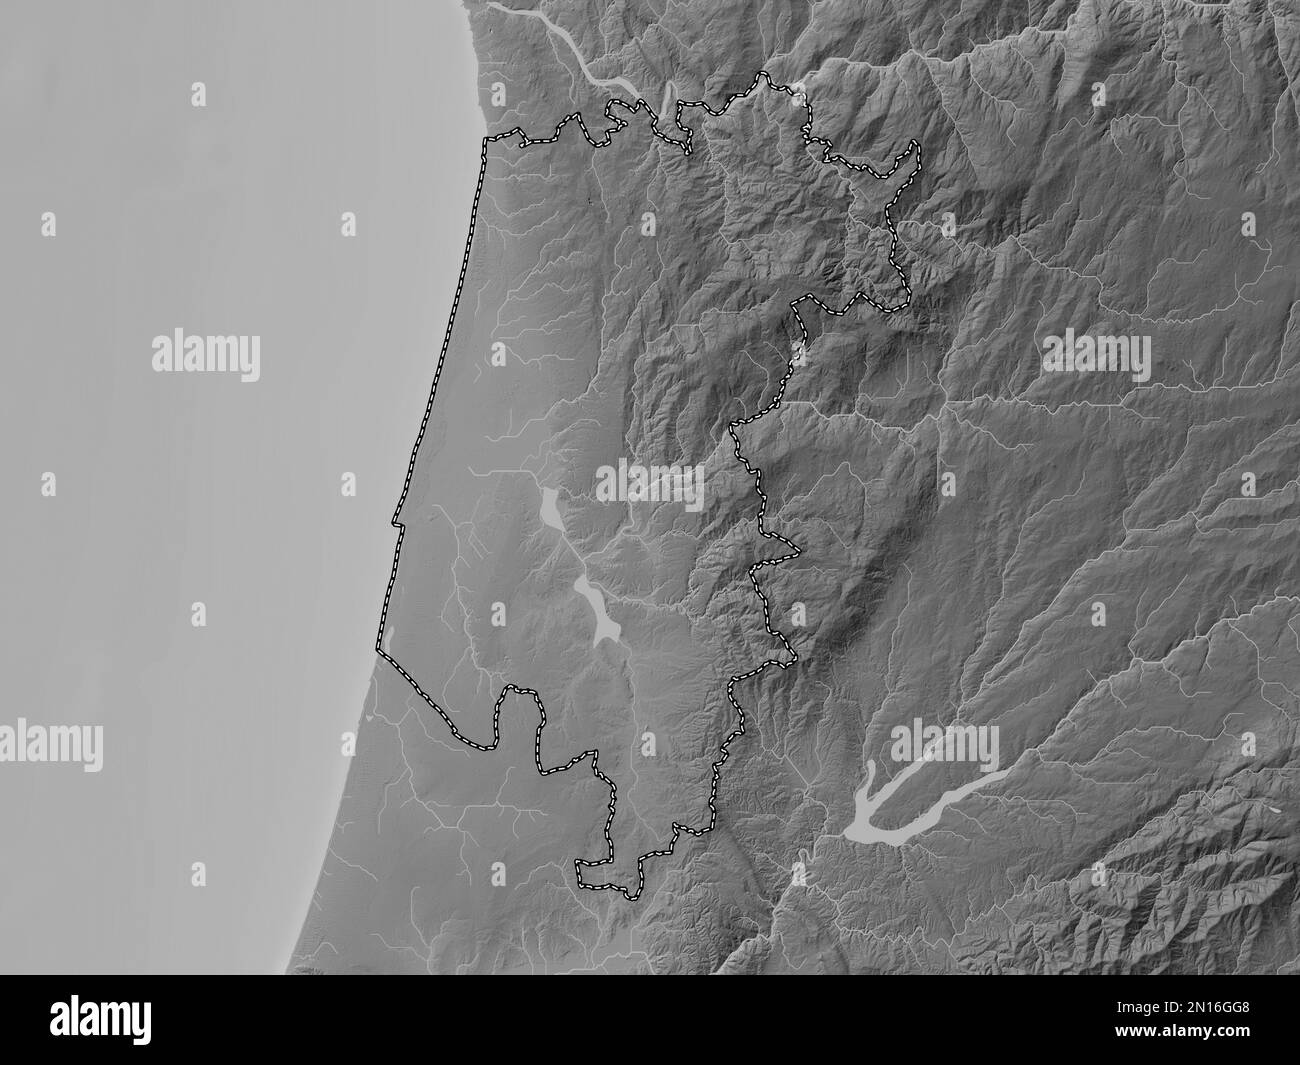 Aveiro, district of Portugal. Grayscale elevation map with lakes and rivers Stock Photo